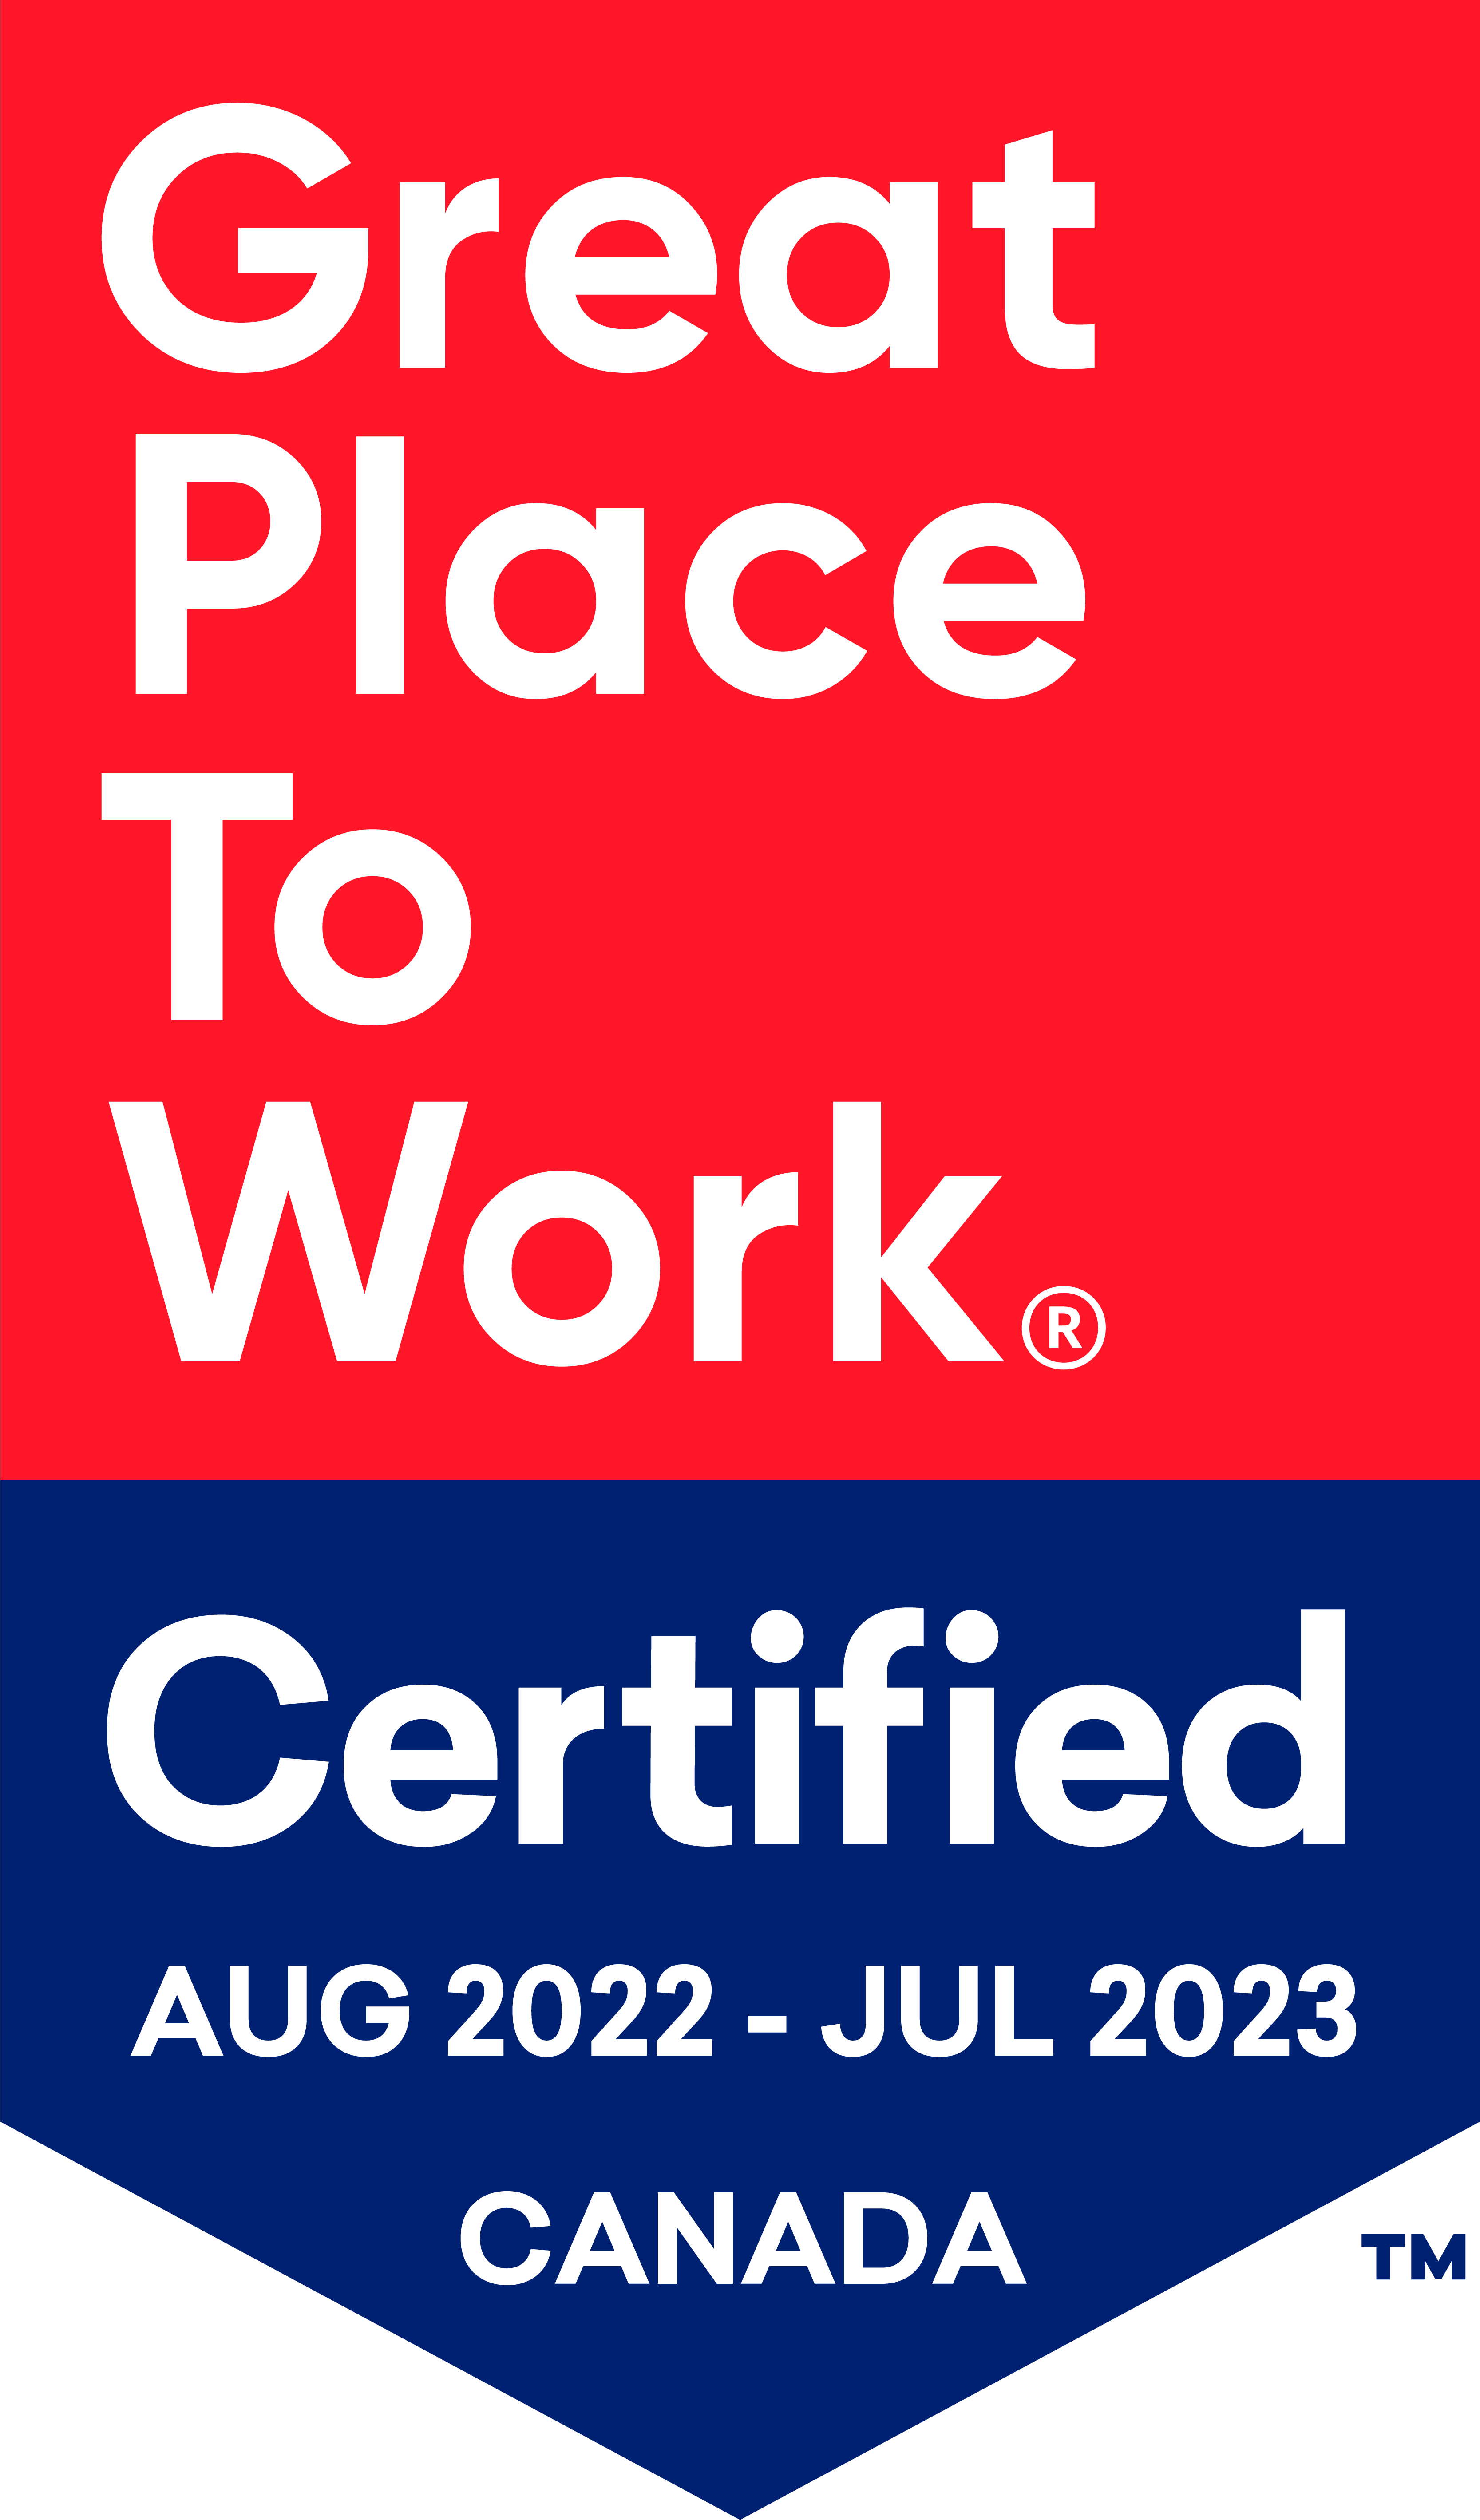 Certified great place to work 2022